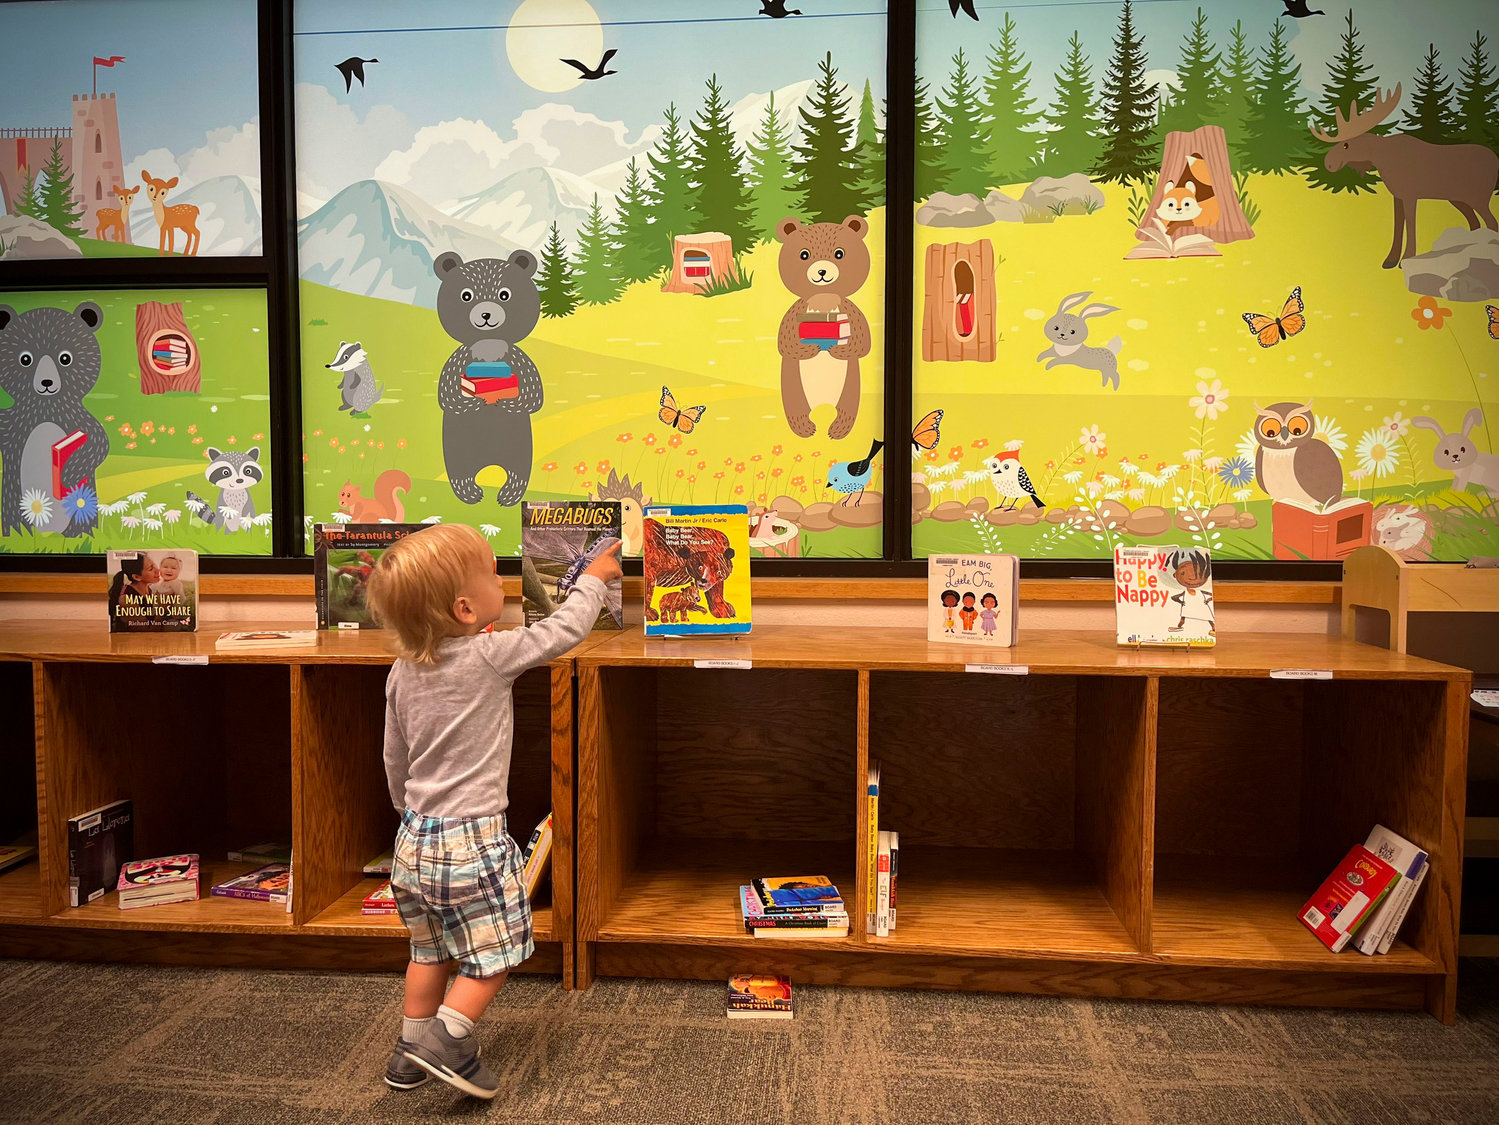 Logan Whorley, age 1, engages with the book display in front of the newly painted "window" mural at the Lacey Timberland Library.